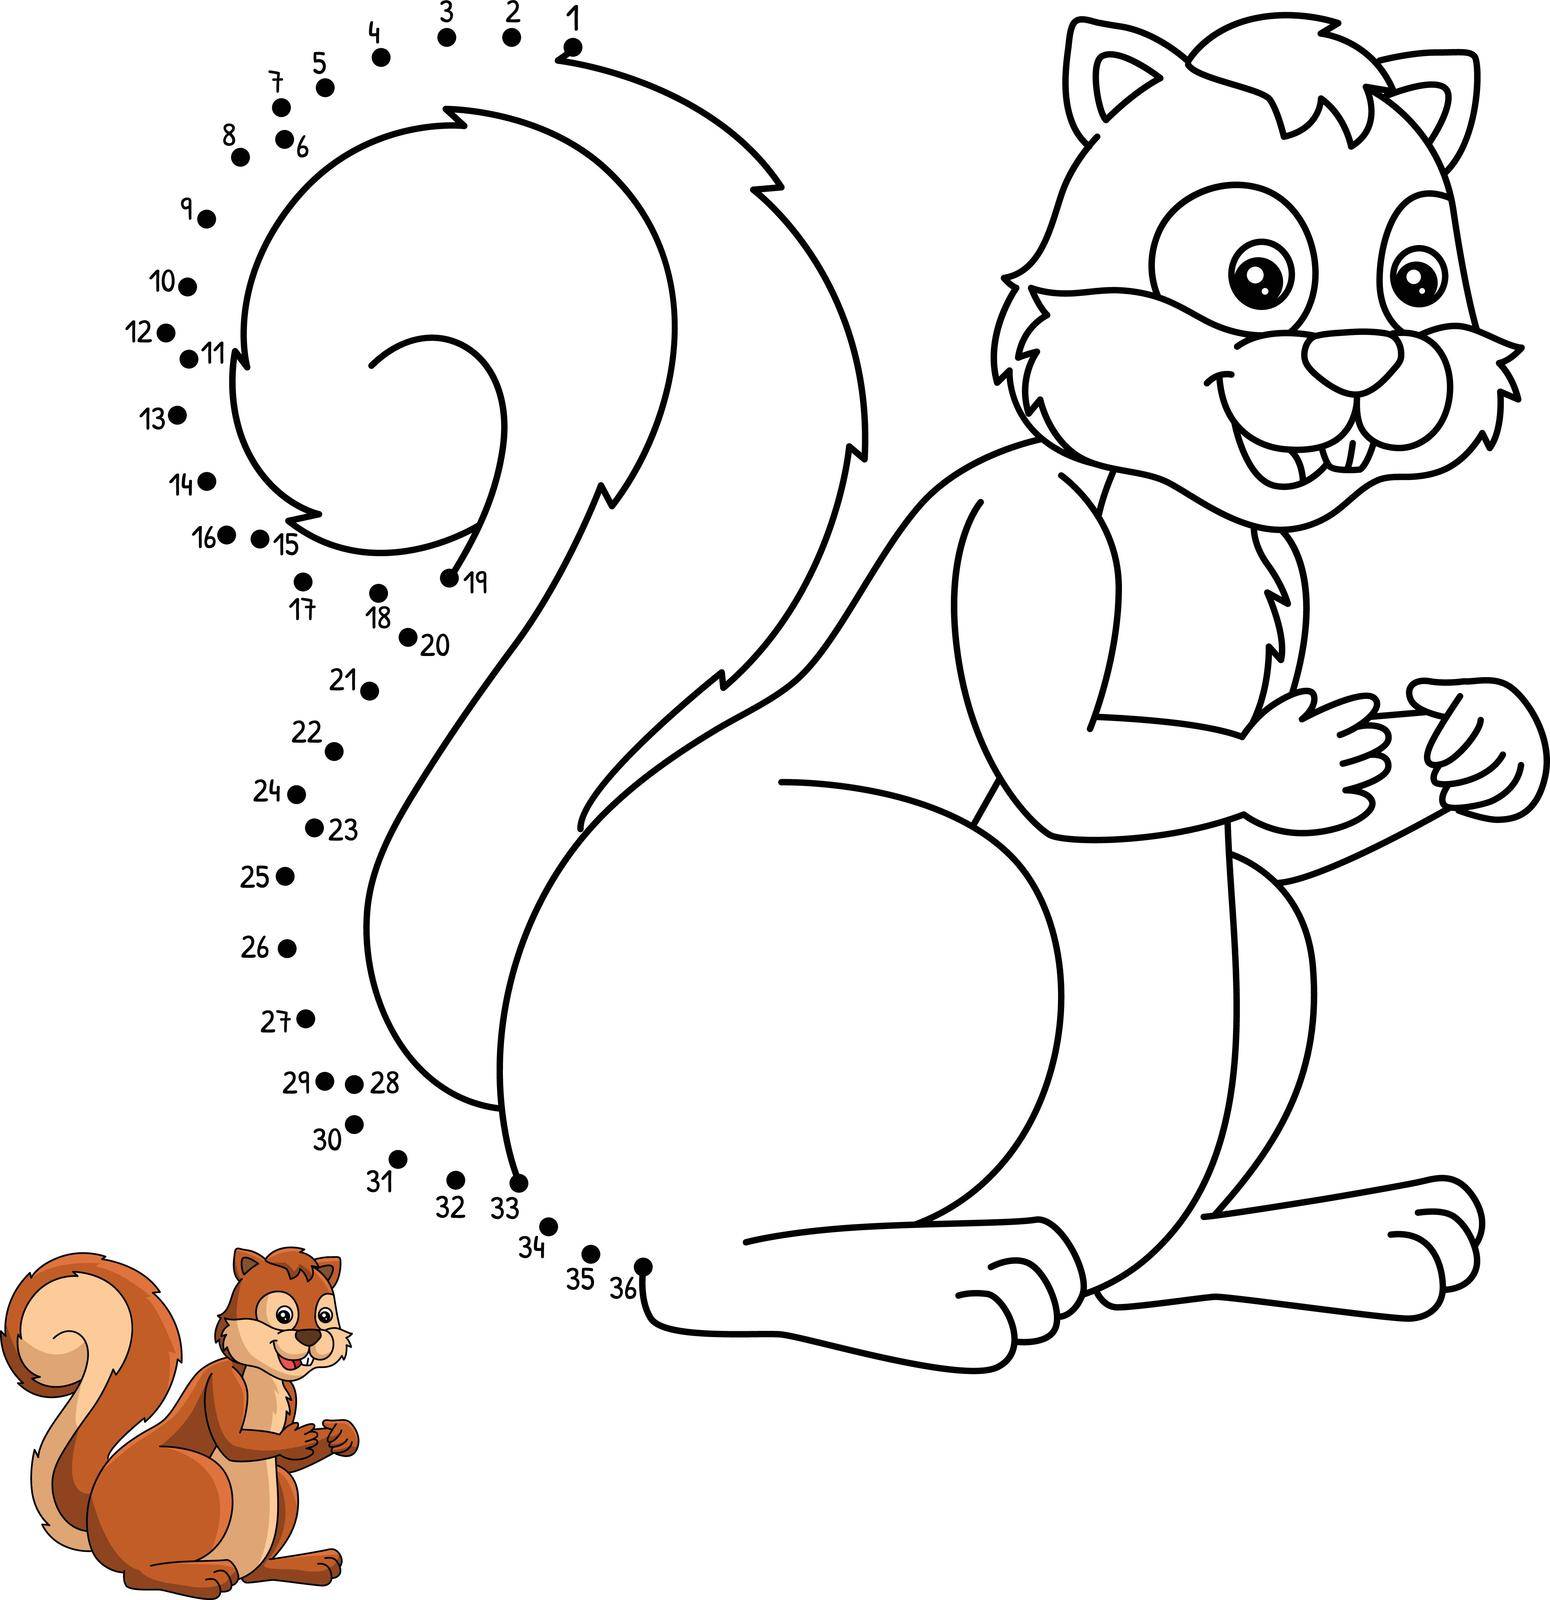 A cute and funny connect-the-dots coloring page of a Squirrel. Provides hours of coloring fun for children. Color, this page is very easy. Suitable for little kids and toddlers.